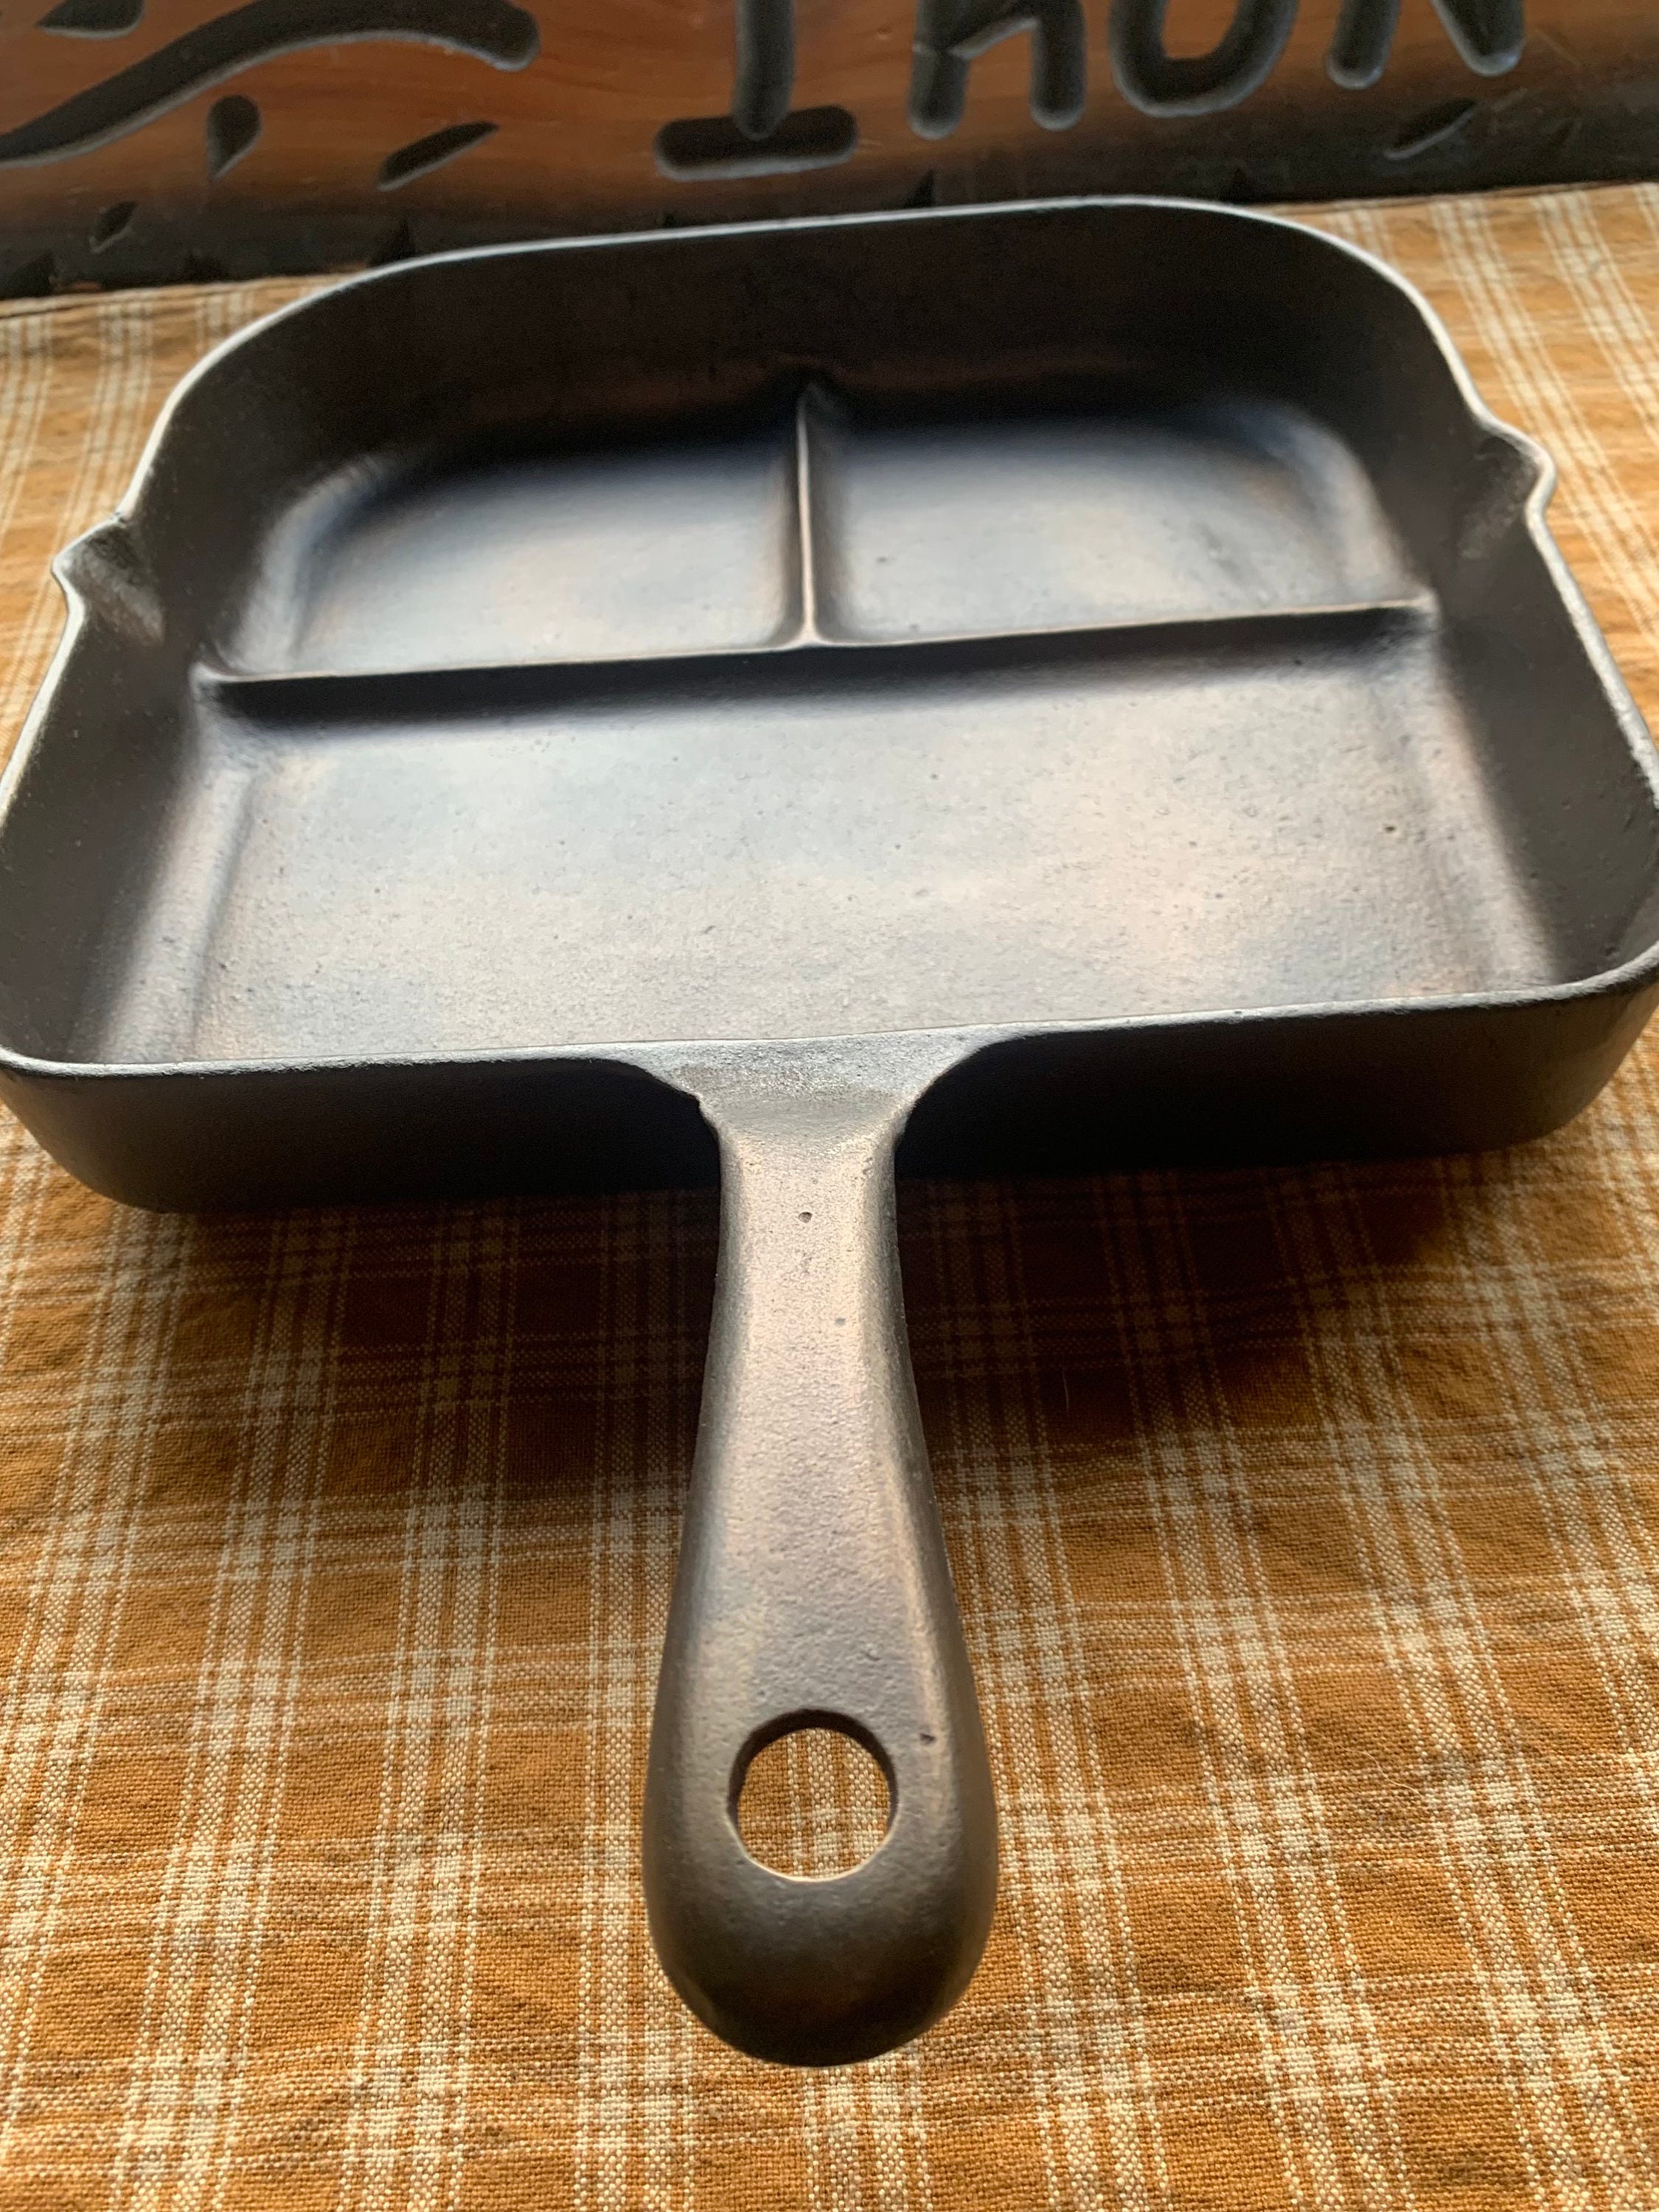 VERY UNIQUE Unmarked Cast Iron Divided Breakfast Skillet Diagonal Angled  Corners 